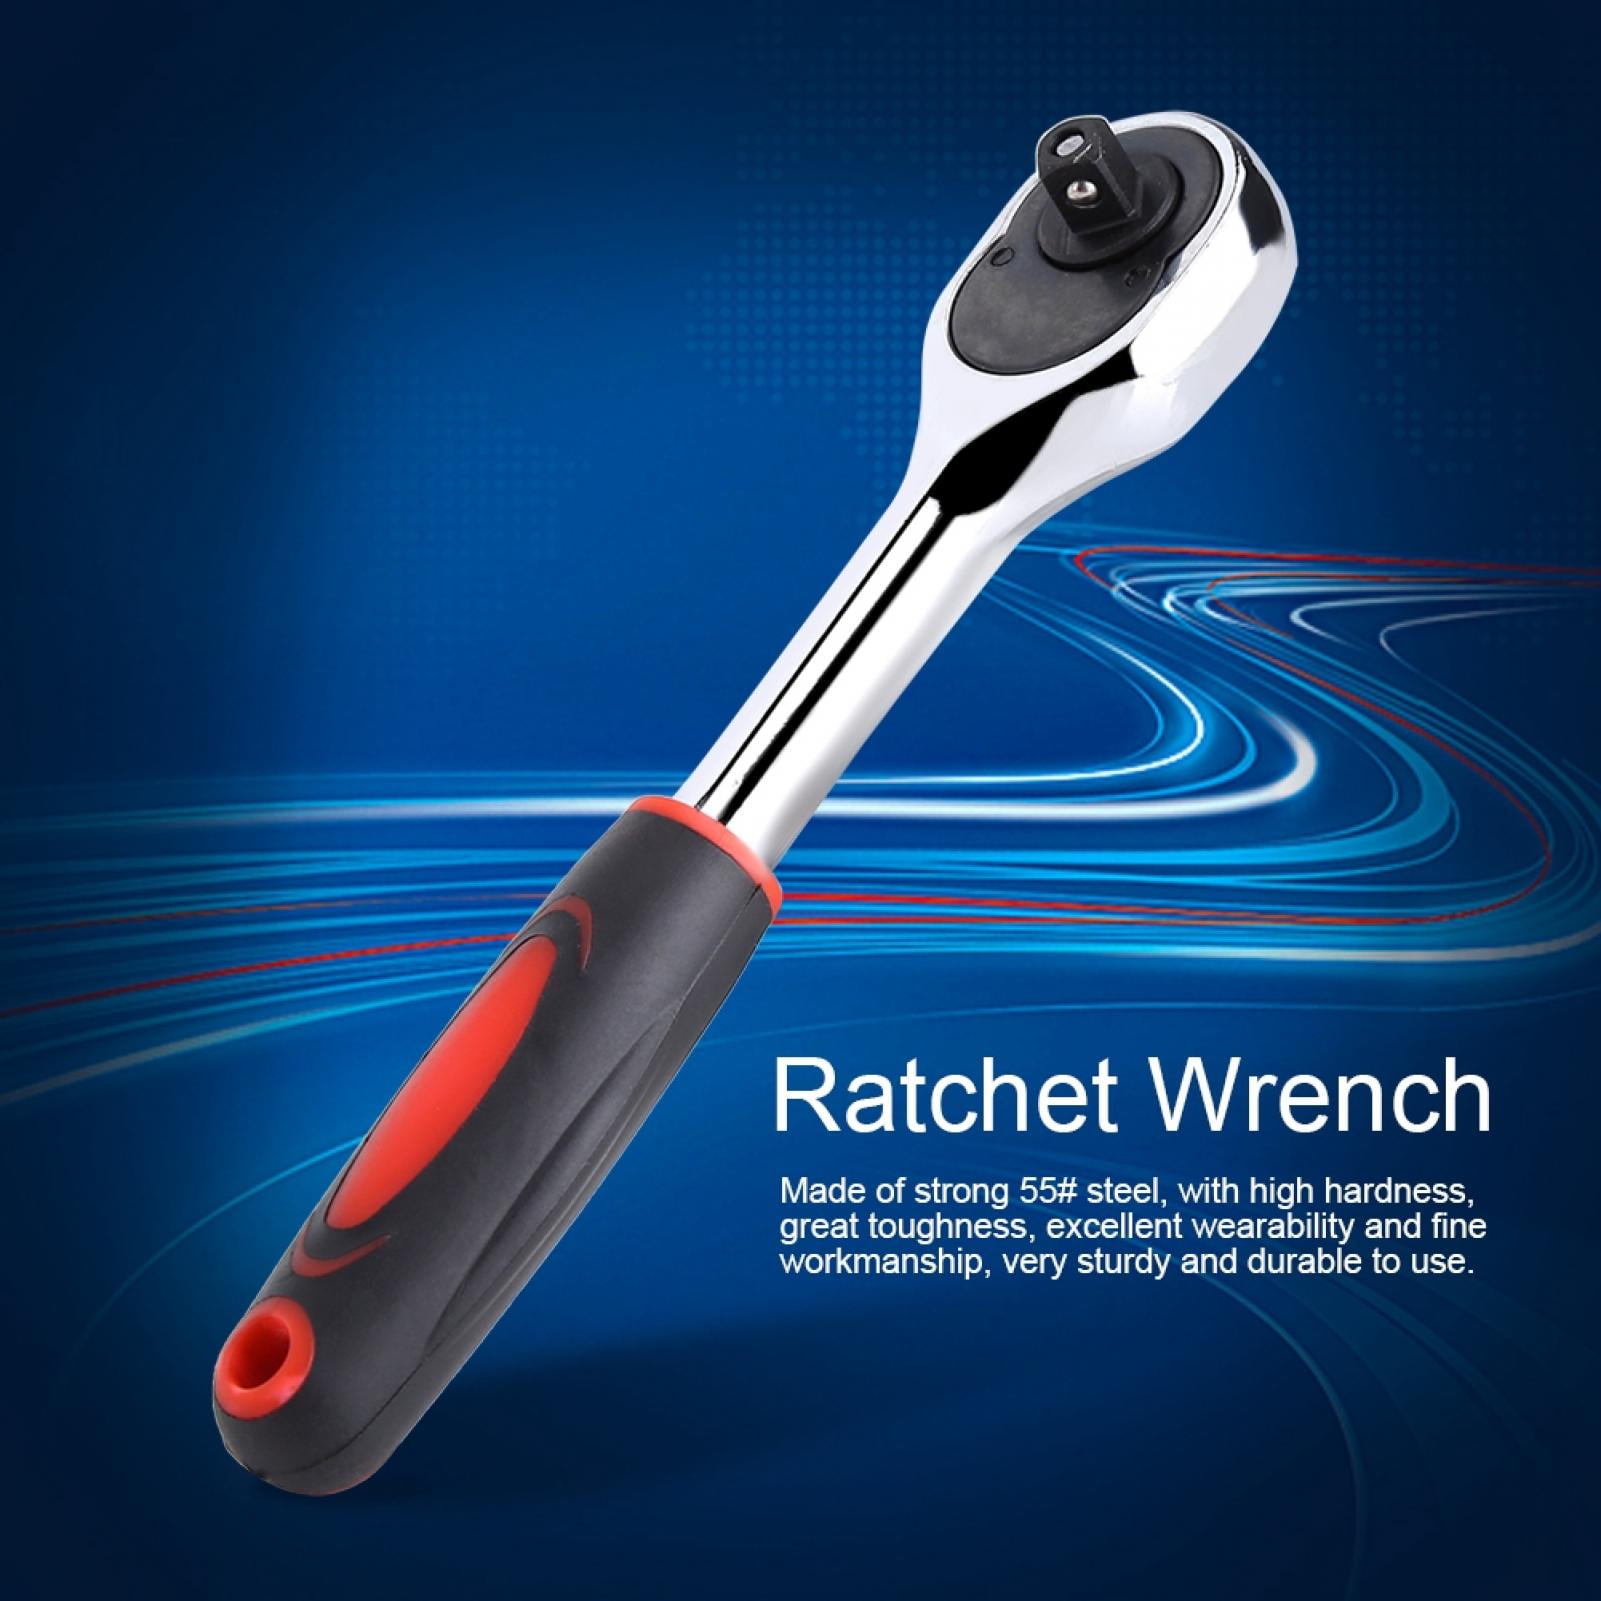 Heavy Duty 1/4" Drive Quick Release Ratchet Socket Wrench Hand Tools